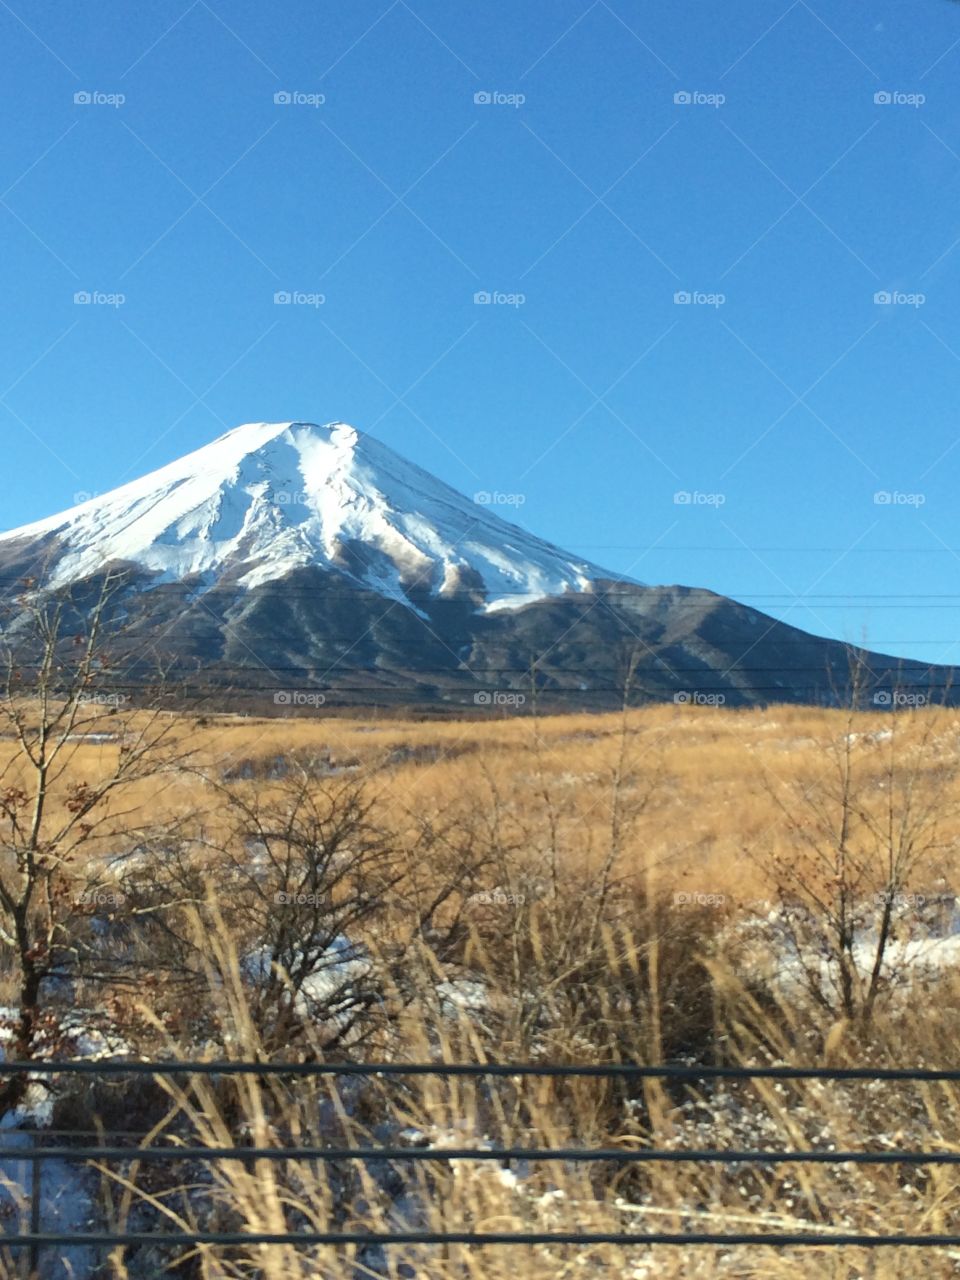 Fuji San!. A picture of Mount Fuji while on a road trip. You can see it from pretty far away and it's always looking great.